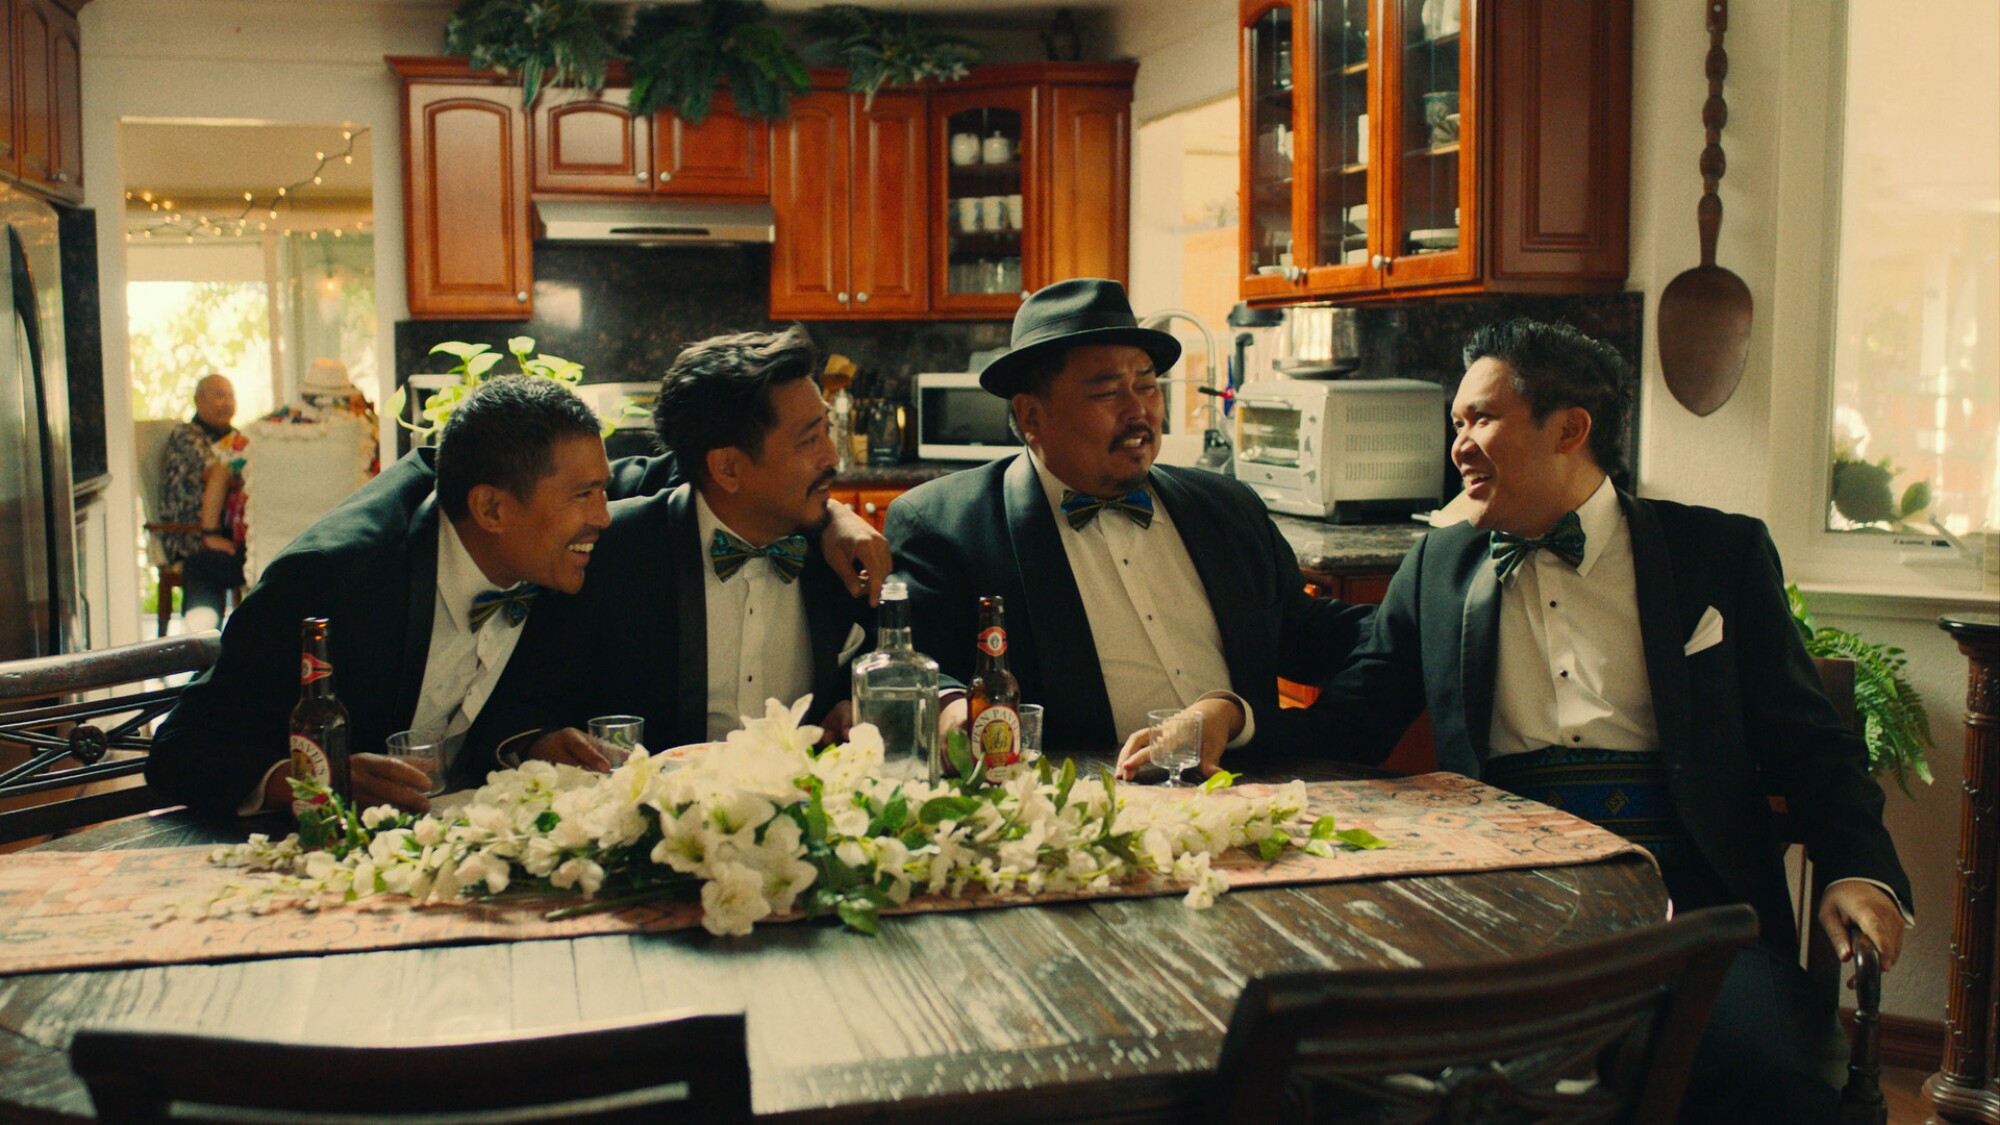 Four men in tuxes at a kitchen table